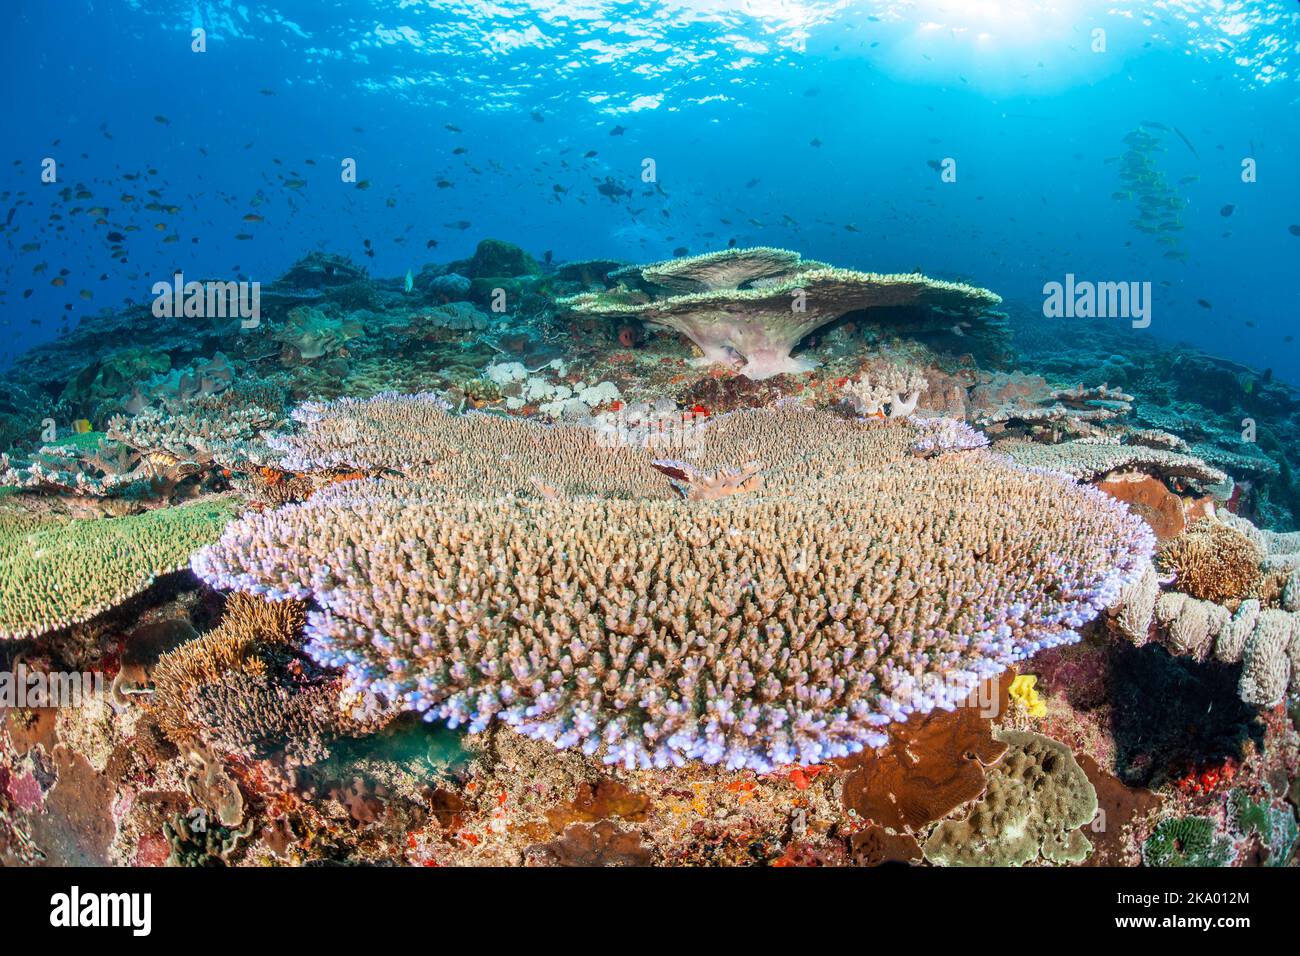 Table coral along with schooling anthias and various reef fish, dominate this underwater scene, Crystal Bay, Nusa Penida, Bali Island, Indonesia, Paci Stock Photo